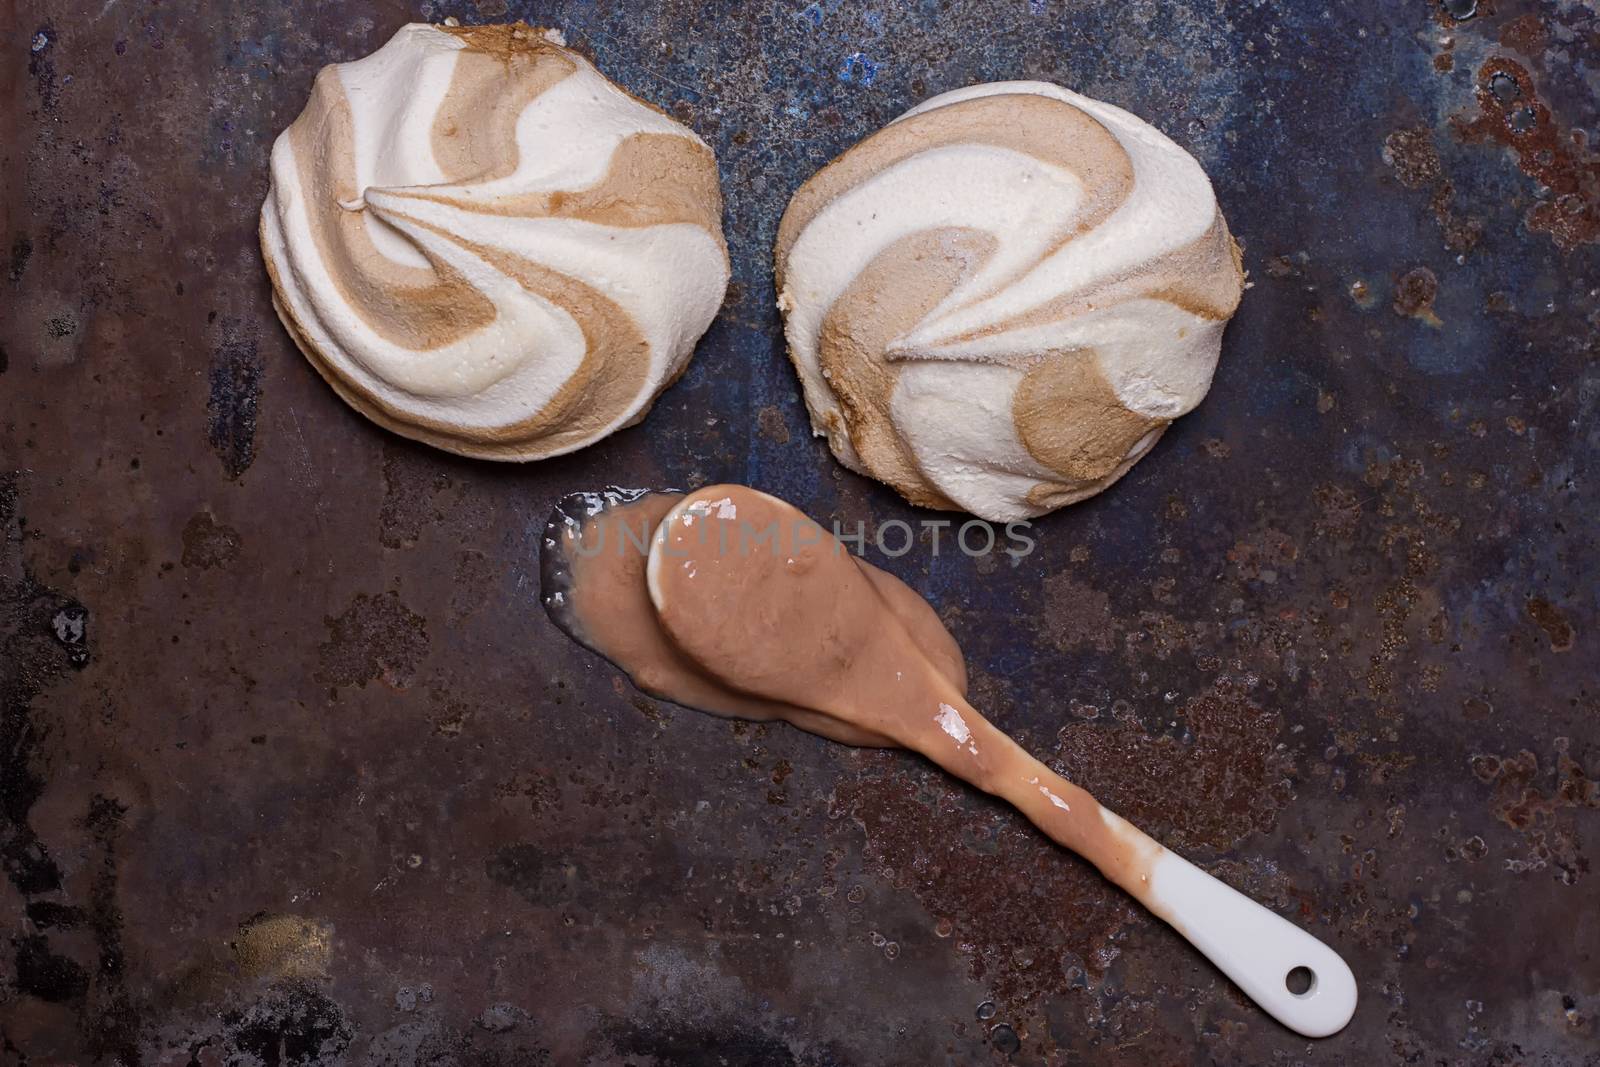 zephyr and a spoon with melted ice cream on a grunge background